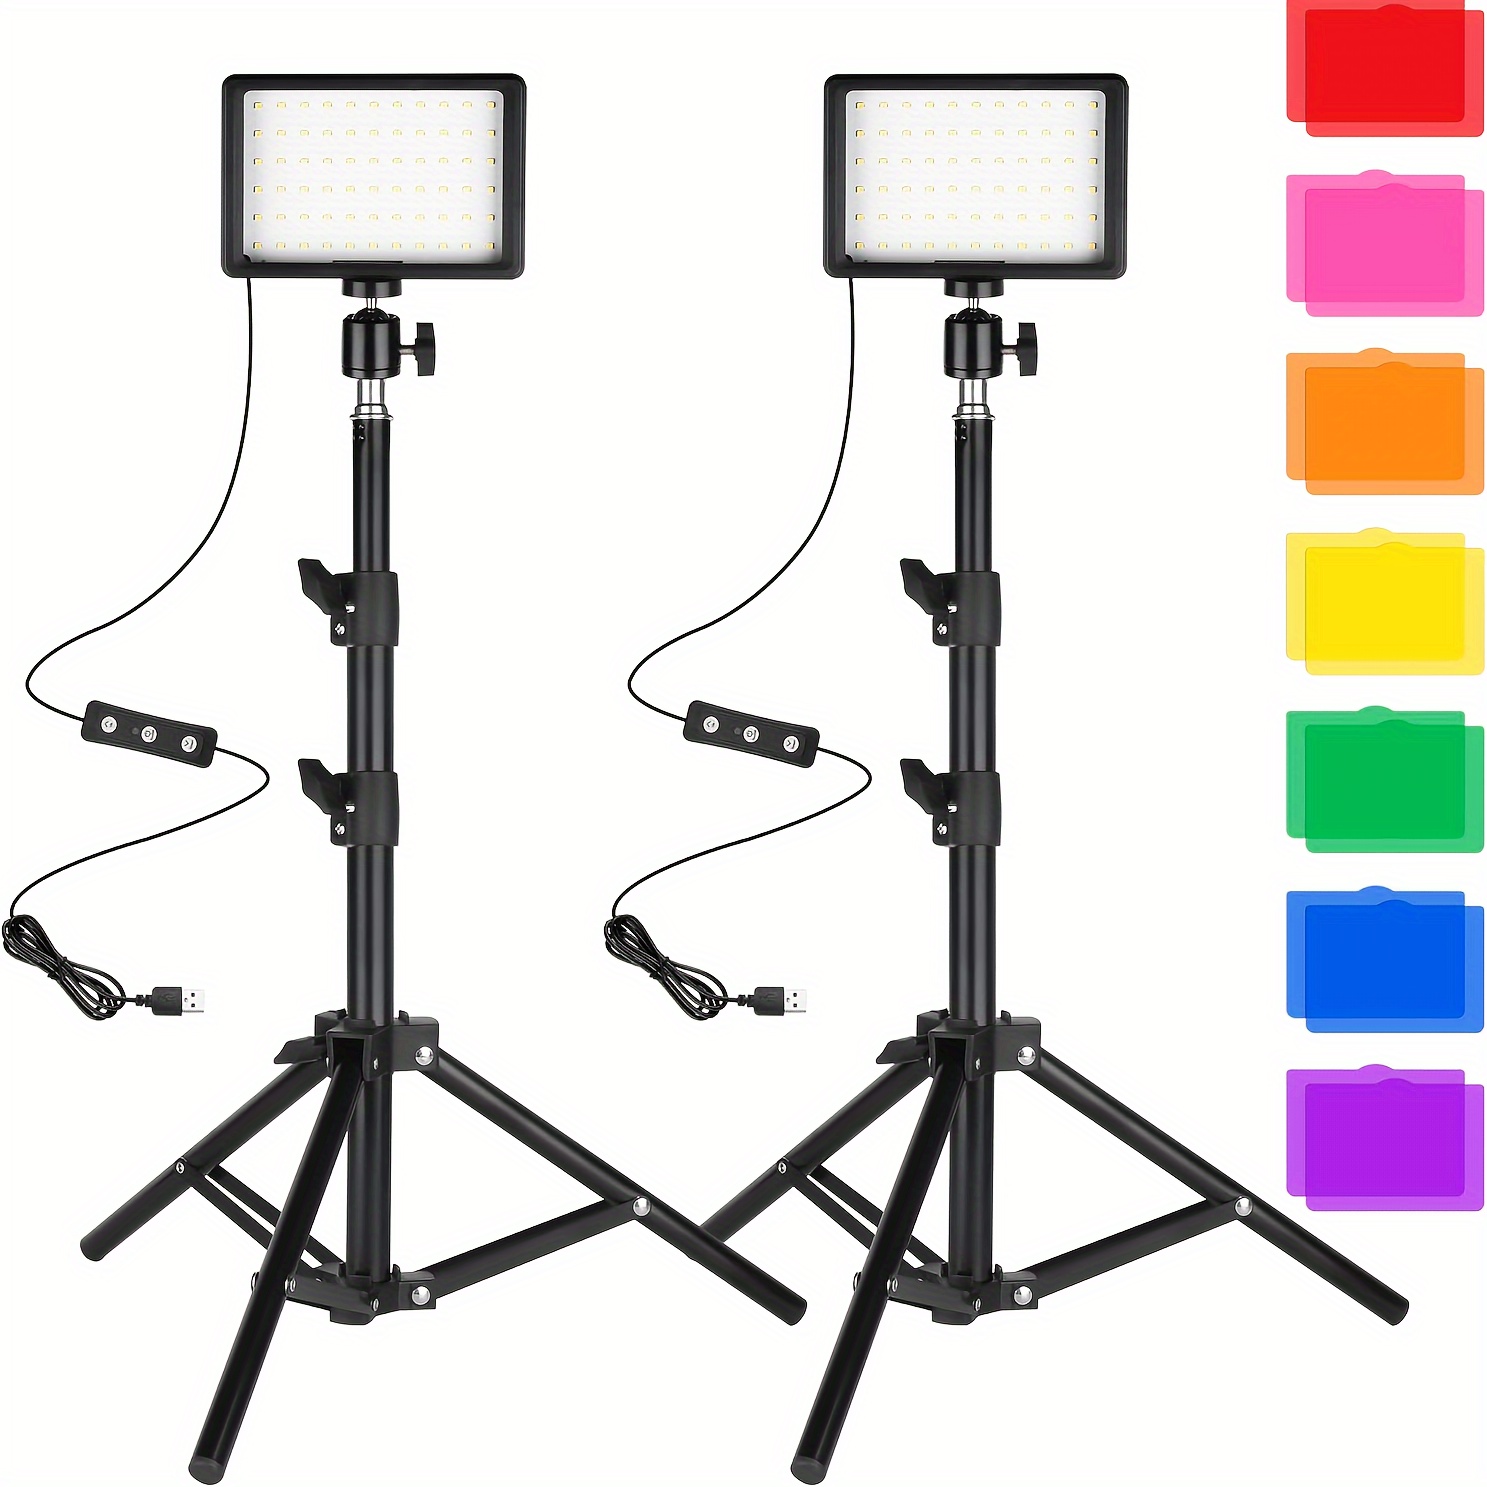 

Led Photo And Video Light 2 Packs With Tripod And Color Filter, Ci-foto Dimmable 5600k Usb Led Continuous Light Photography Light, Suitable For Photography Studio, Video Recording, Game Streaming